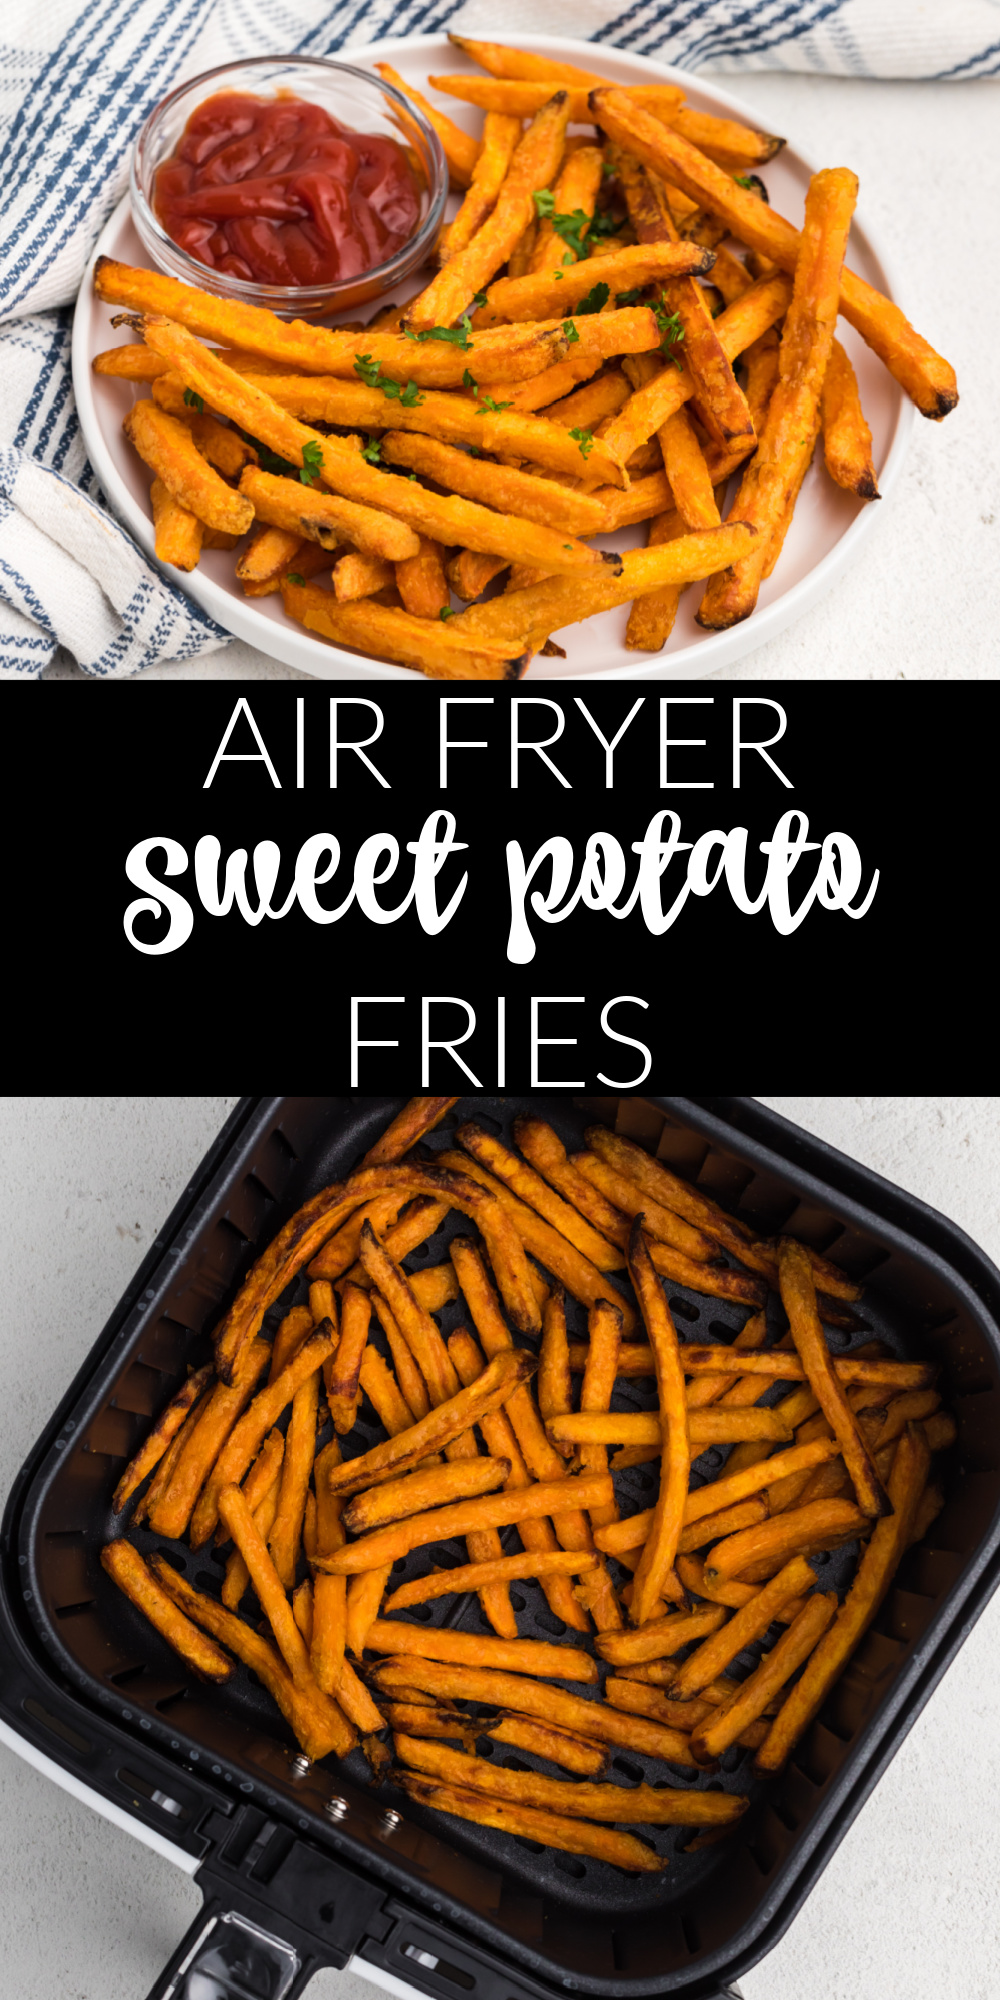 Crisp frozen sweet potato fries are possible with the use of an air fryer! In this recipe I use Ore-Ida, but you can use any brand you have on hand!